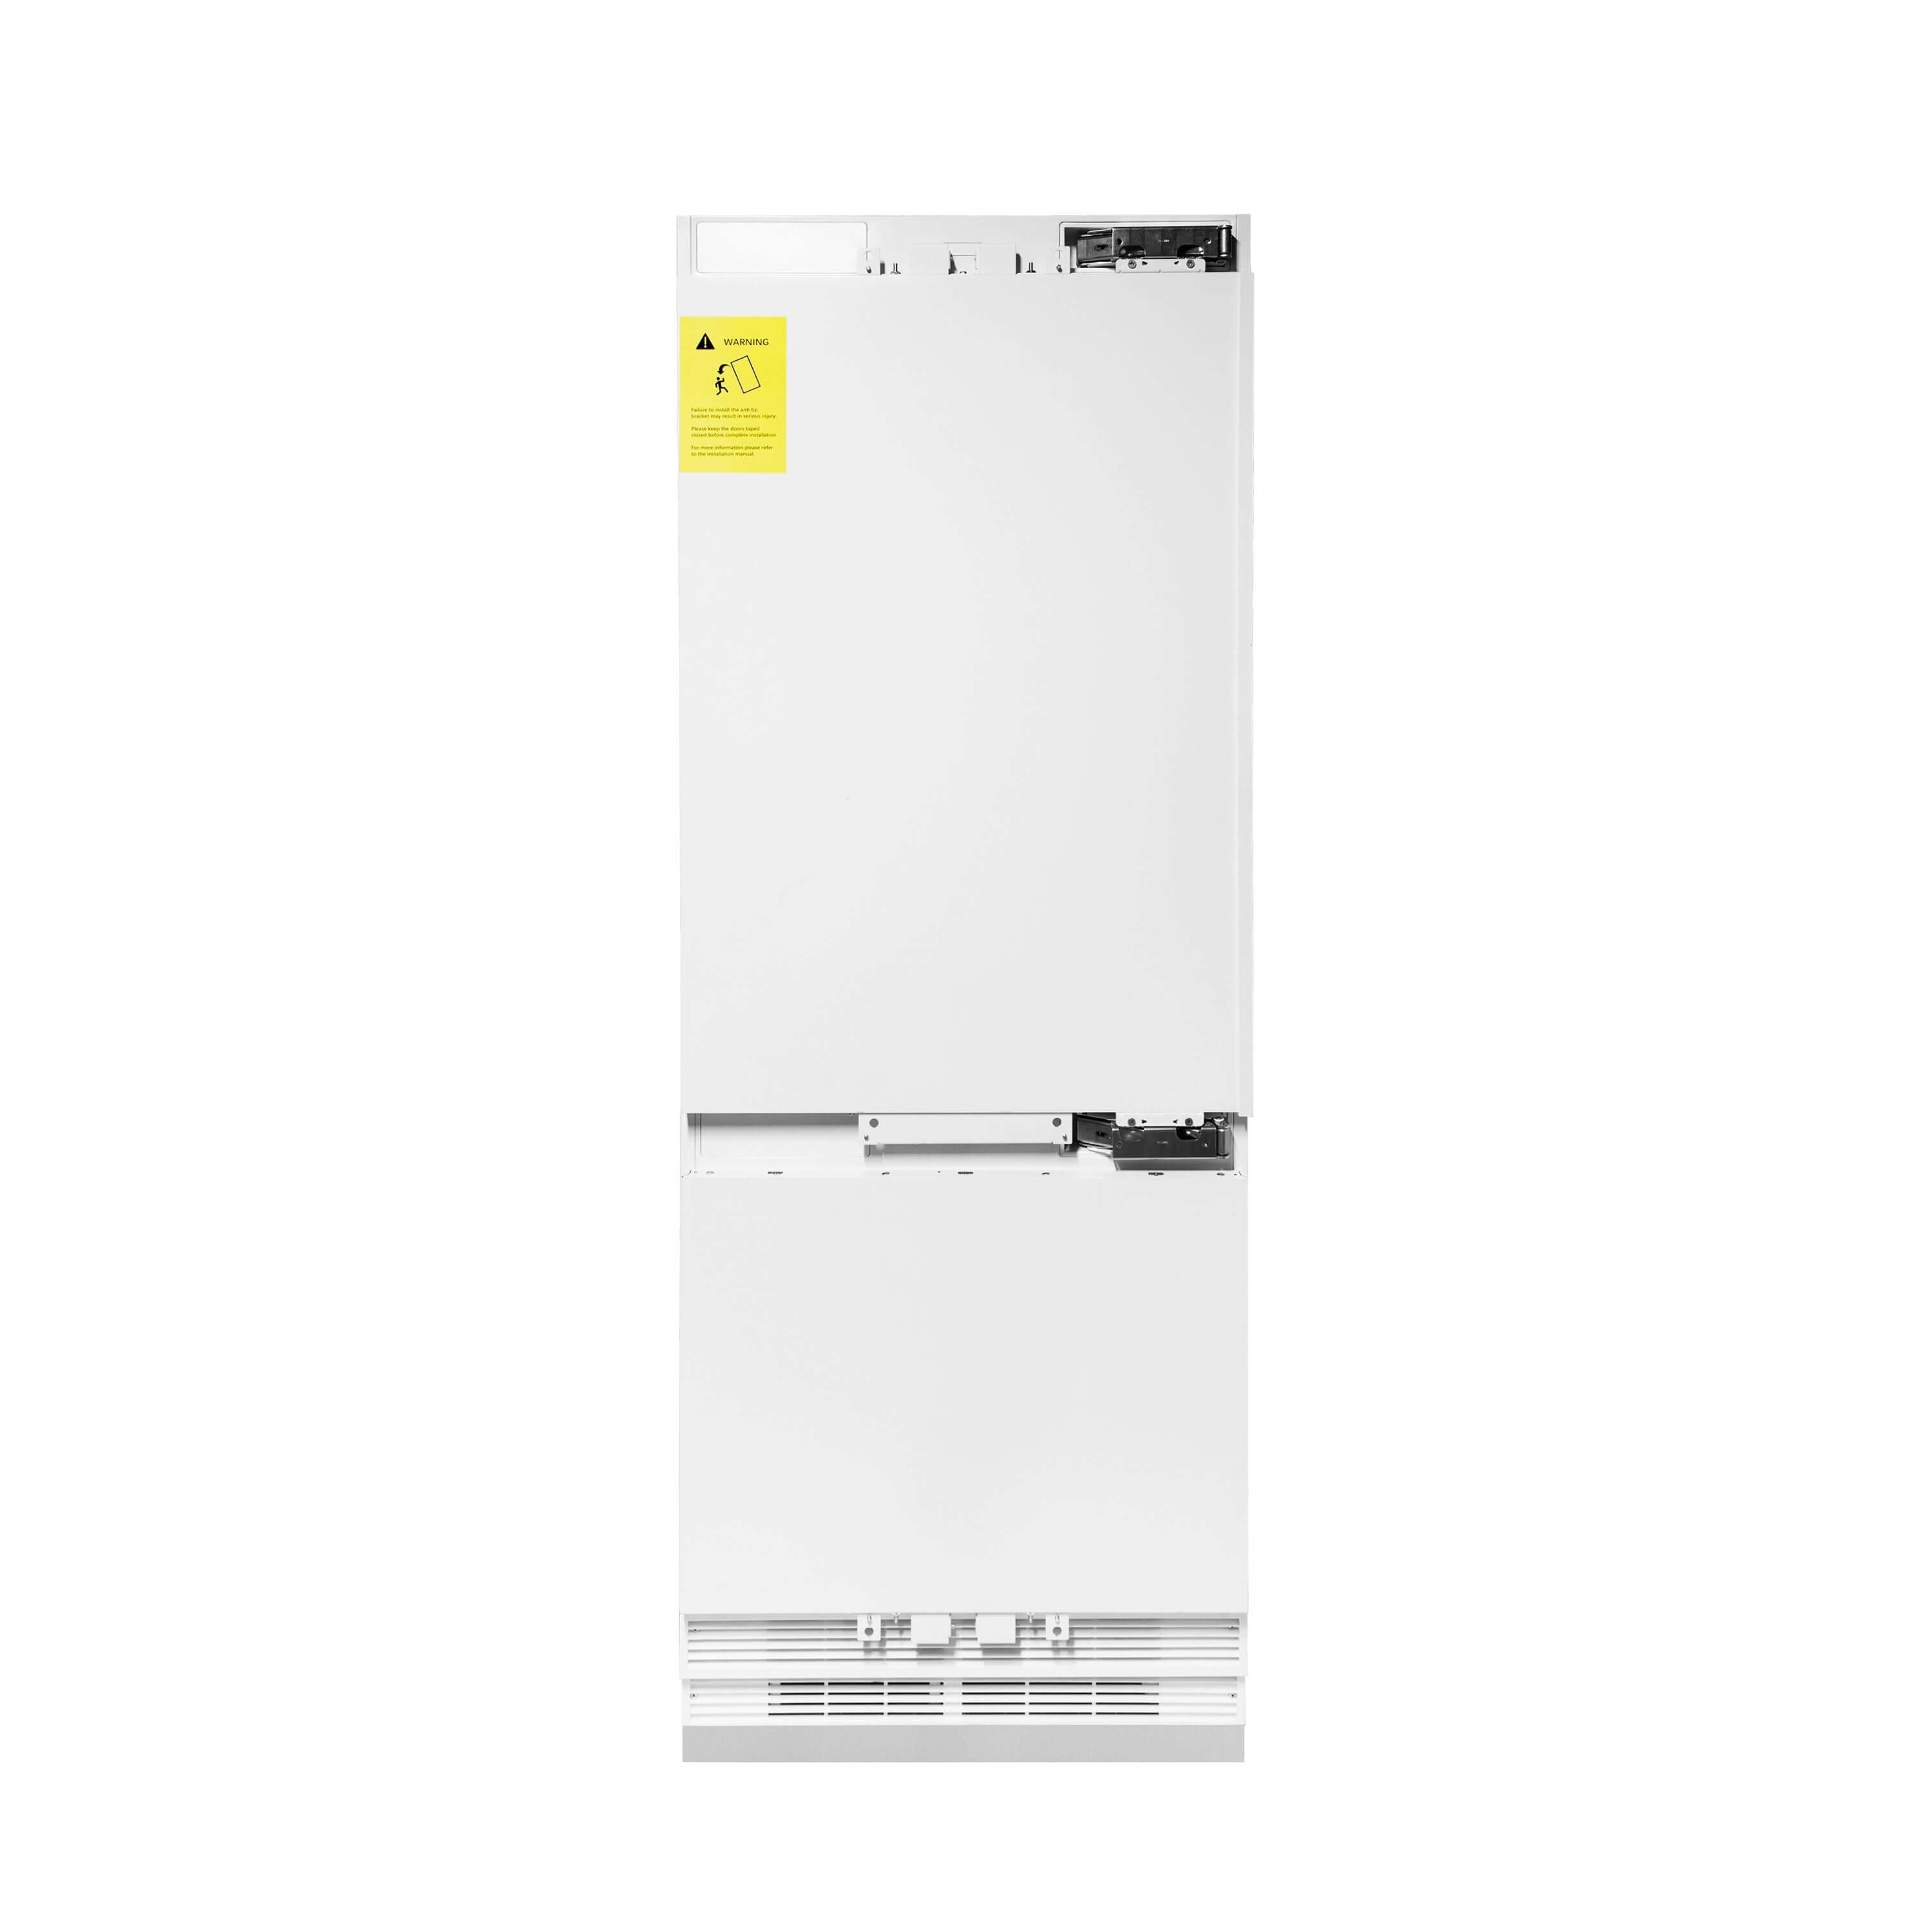 ZLINE 30 in. Built-in Panel Ready Refrigerator (RBIV-30) without panels.